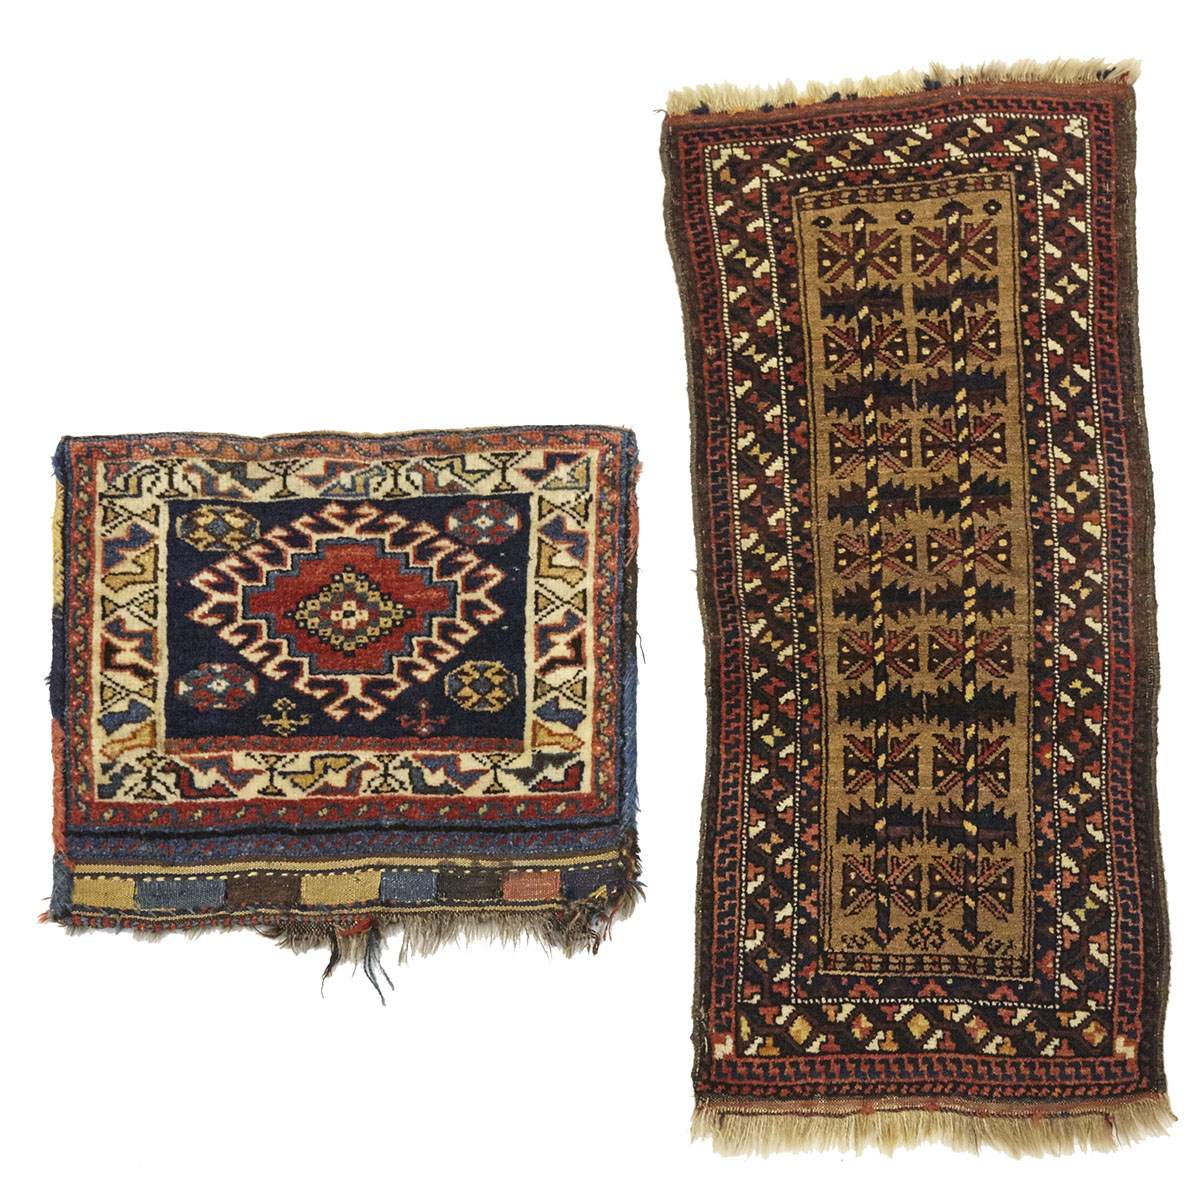 Luri Double Bag Face, early 20th century together with a Balouch Pillow Cover, mid 20th century